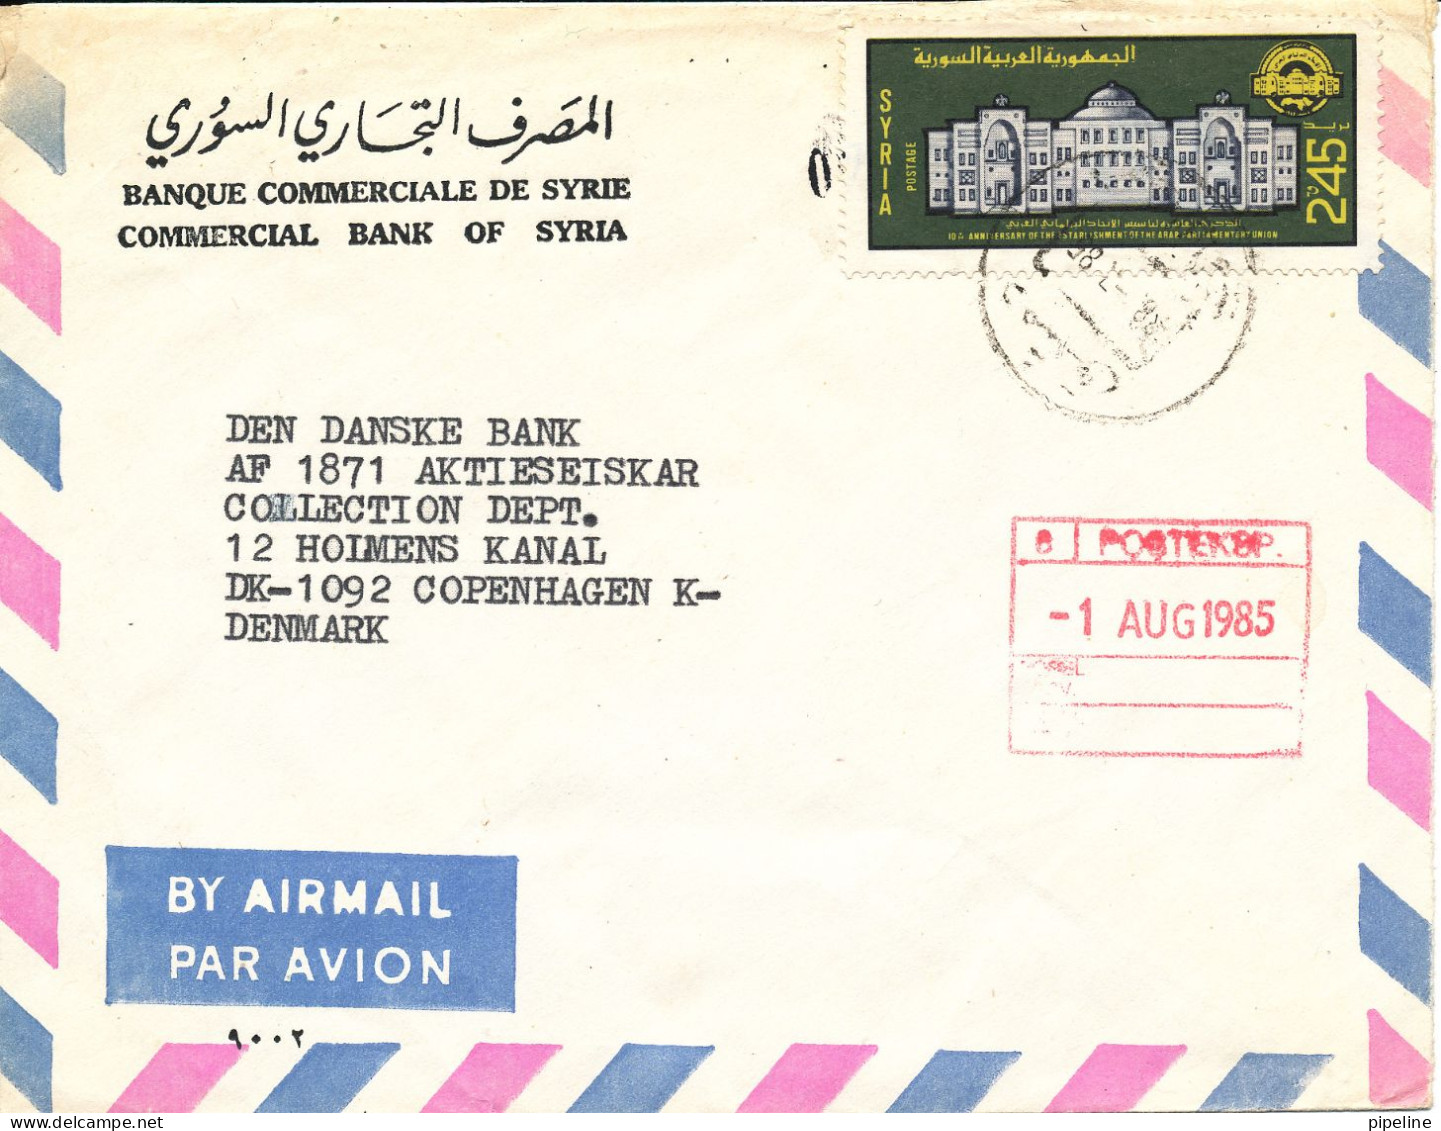 Syria Air Mail Bank Cover Sent To Denmark 28-7-1985 (Commercial Bank Of Syria) - Syrie